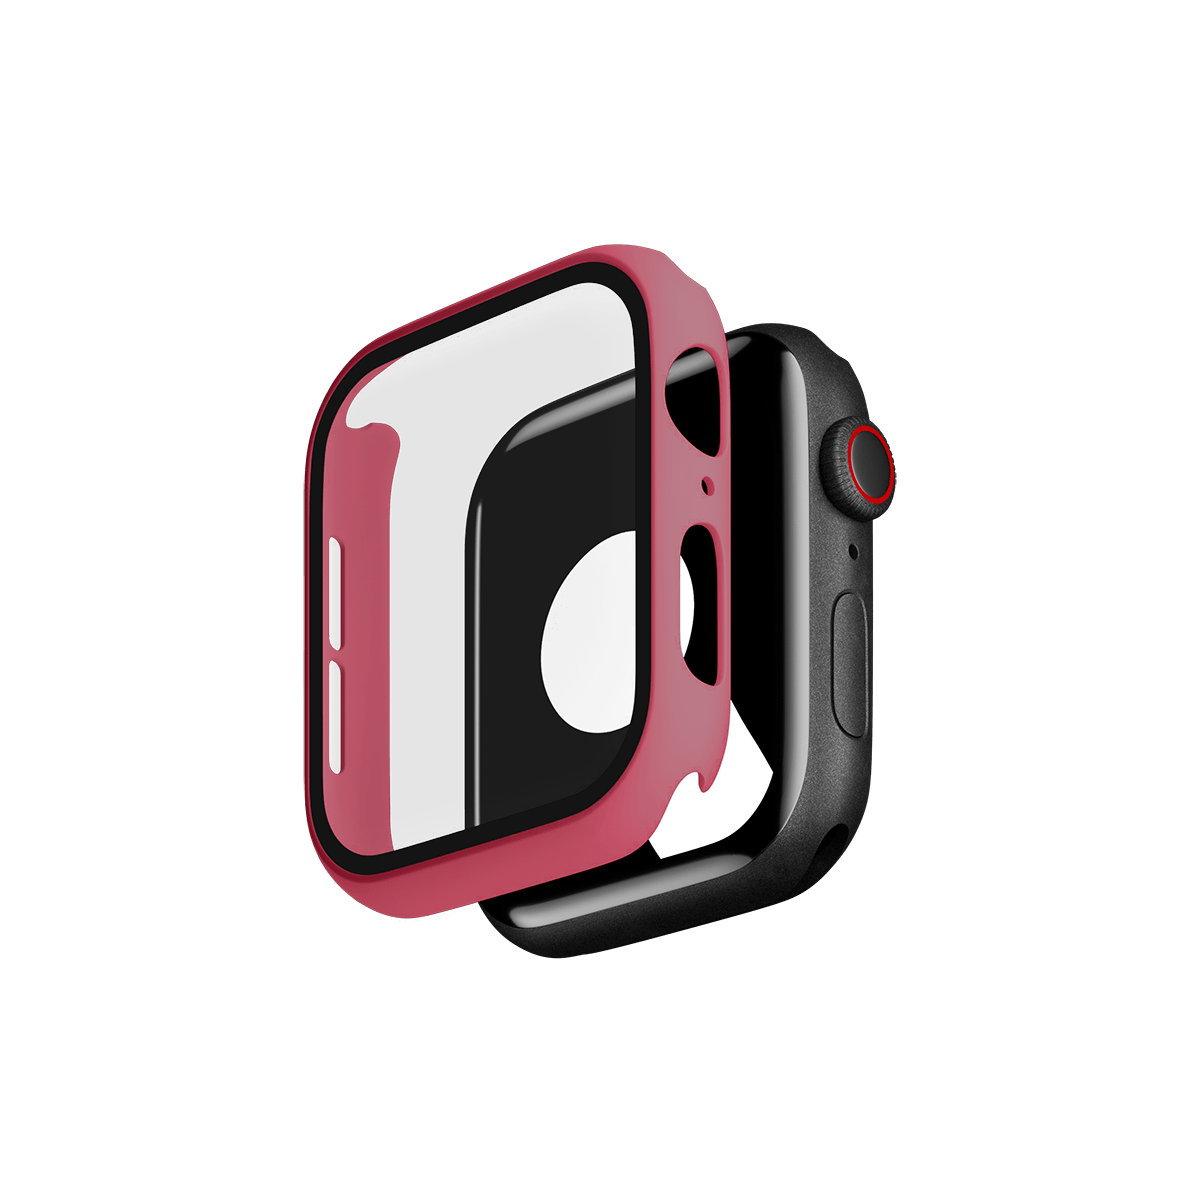 Dragon Fruit Case Protector for Apple Watch